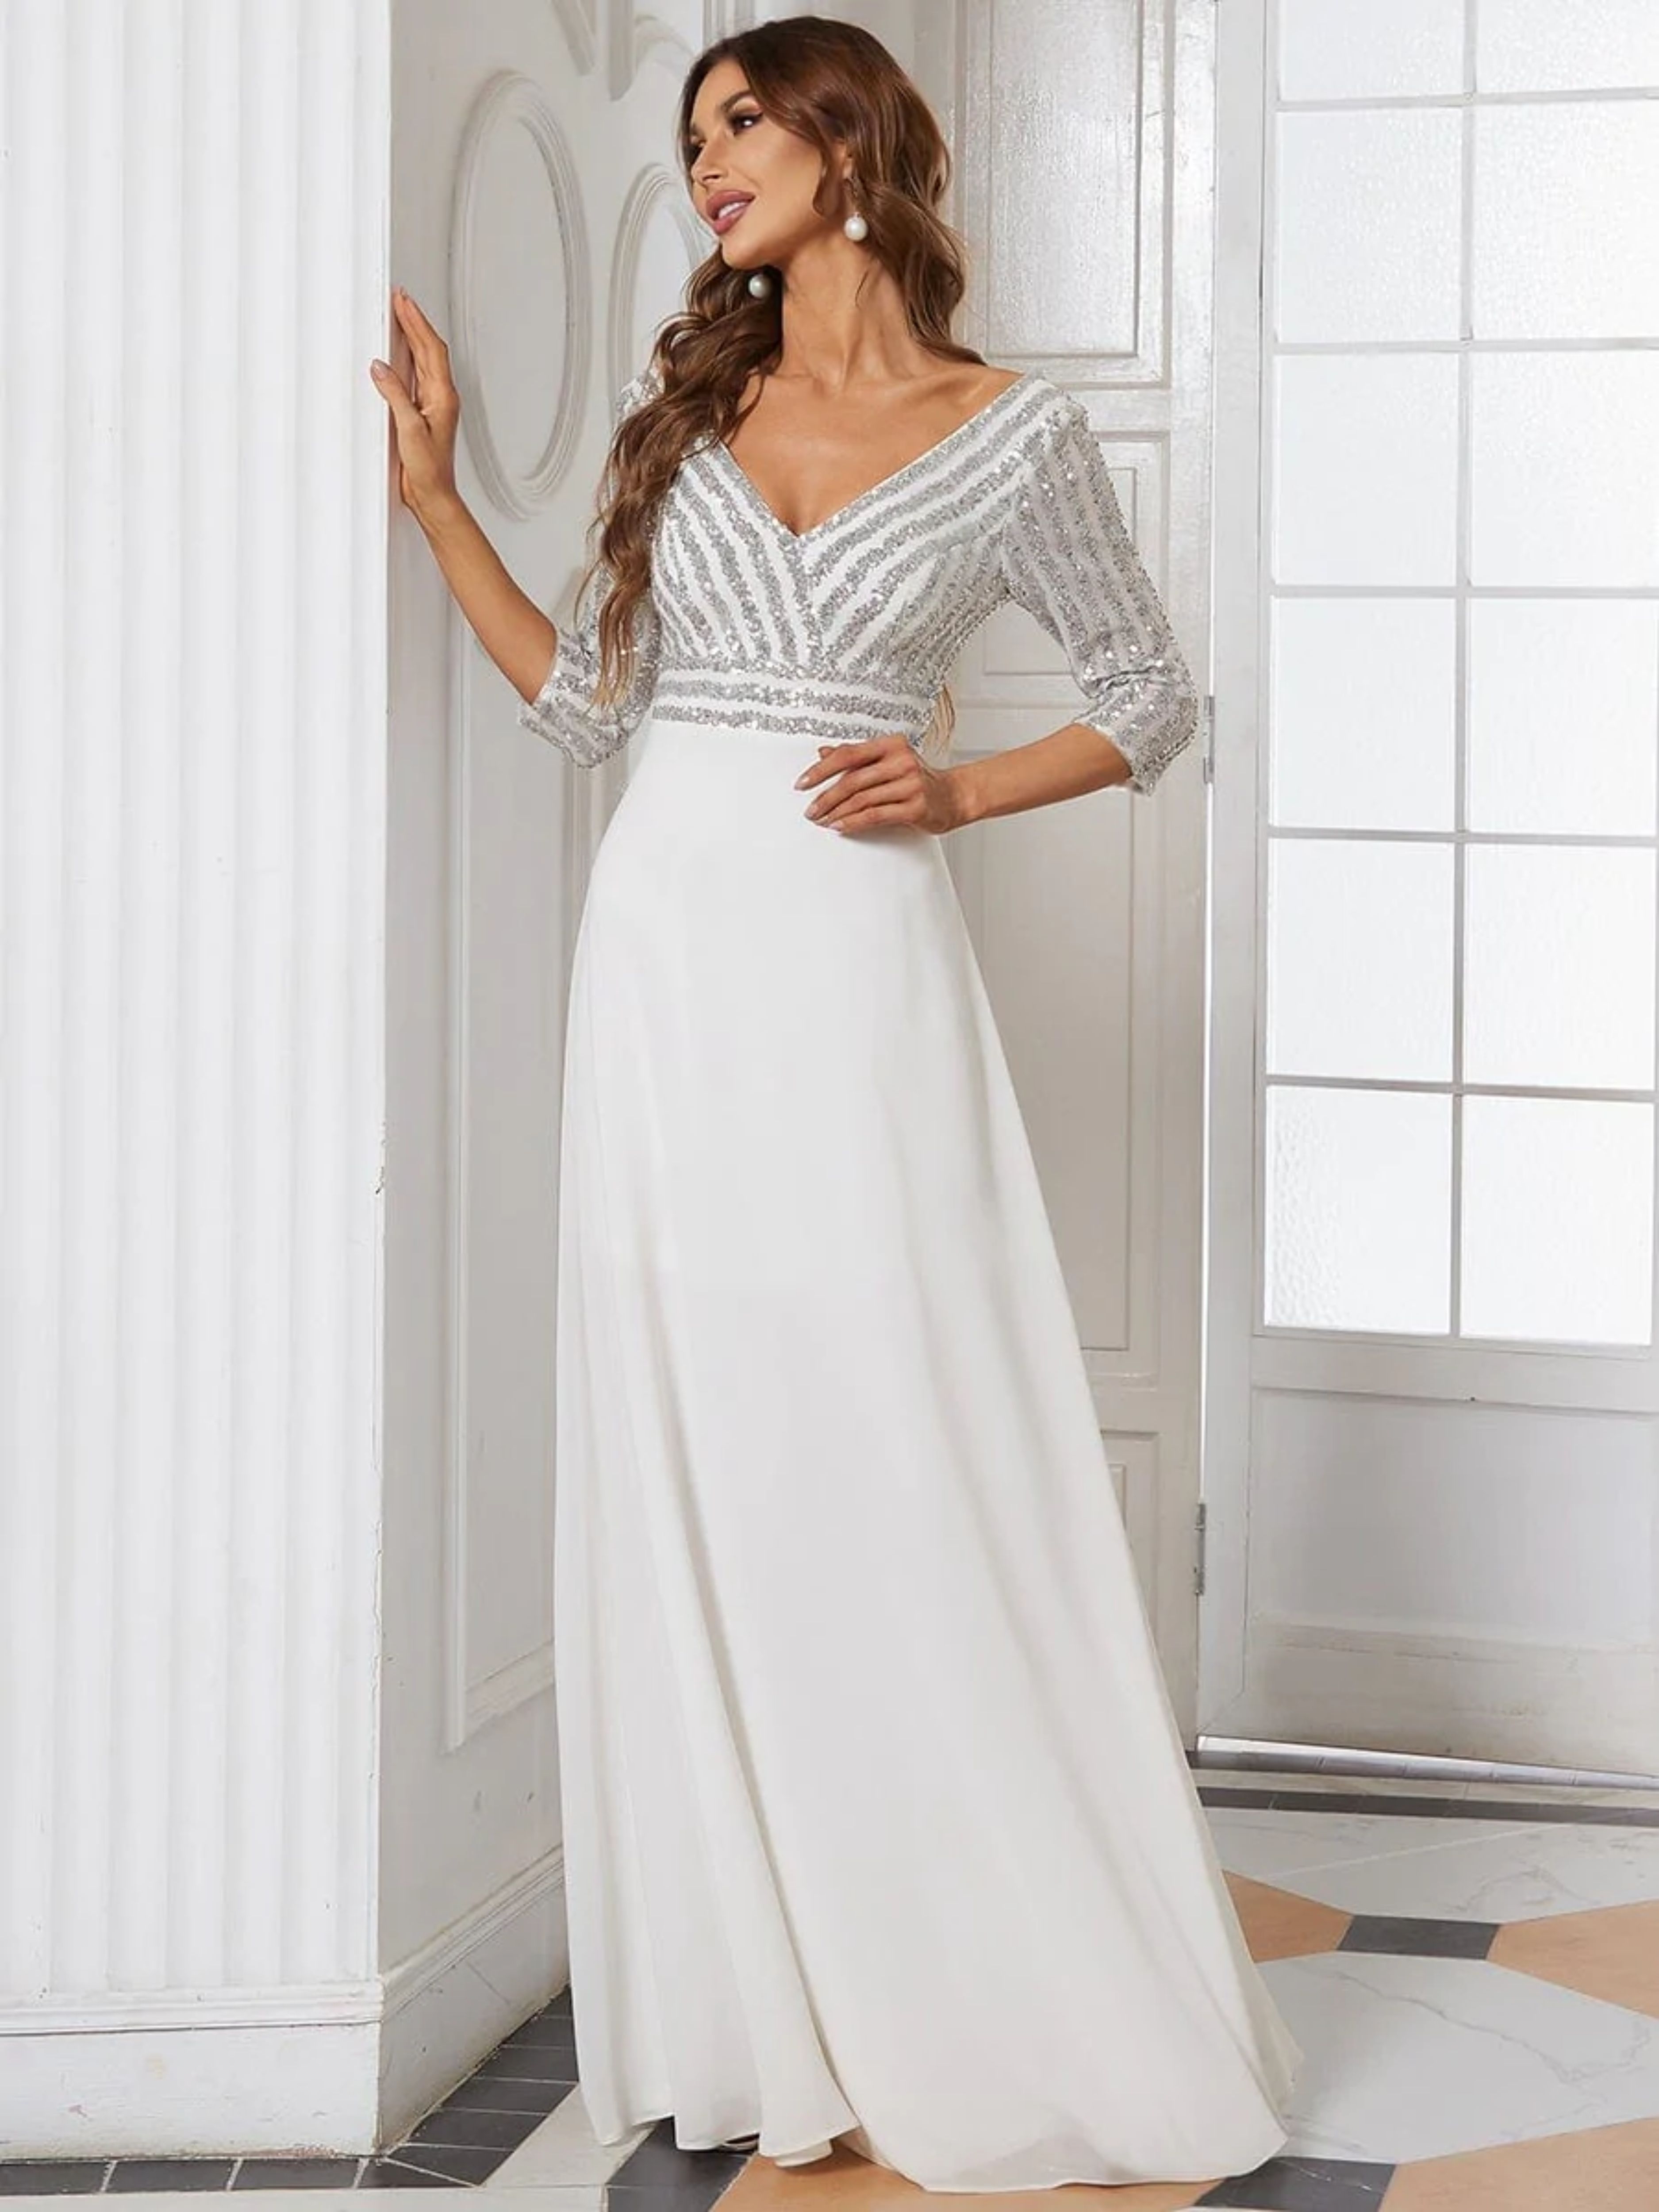 FEATURING A DOUBLE DEEP V NECKLINE, LONG SLEEVES AND A FLOWY A-LINE SKIRT.